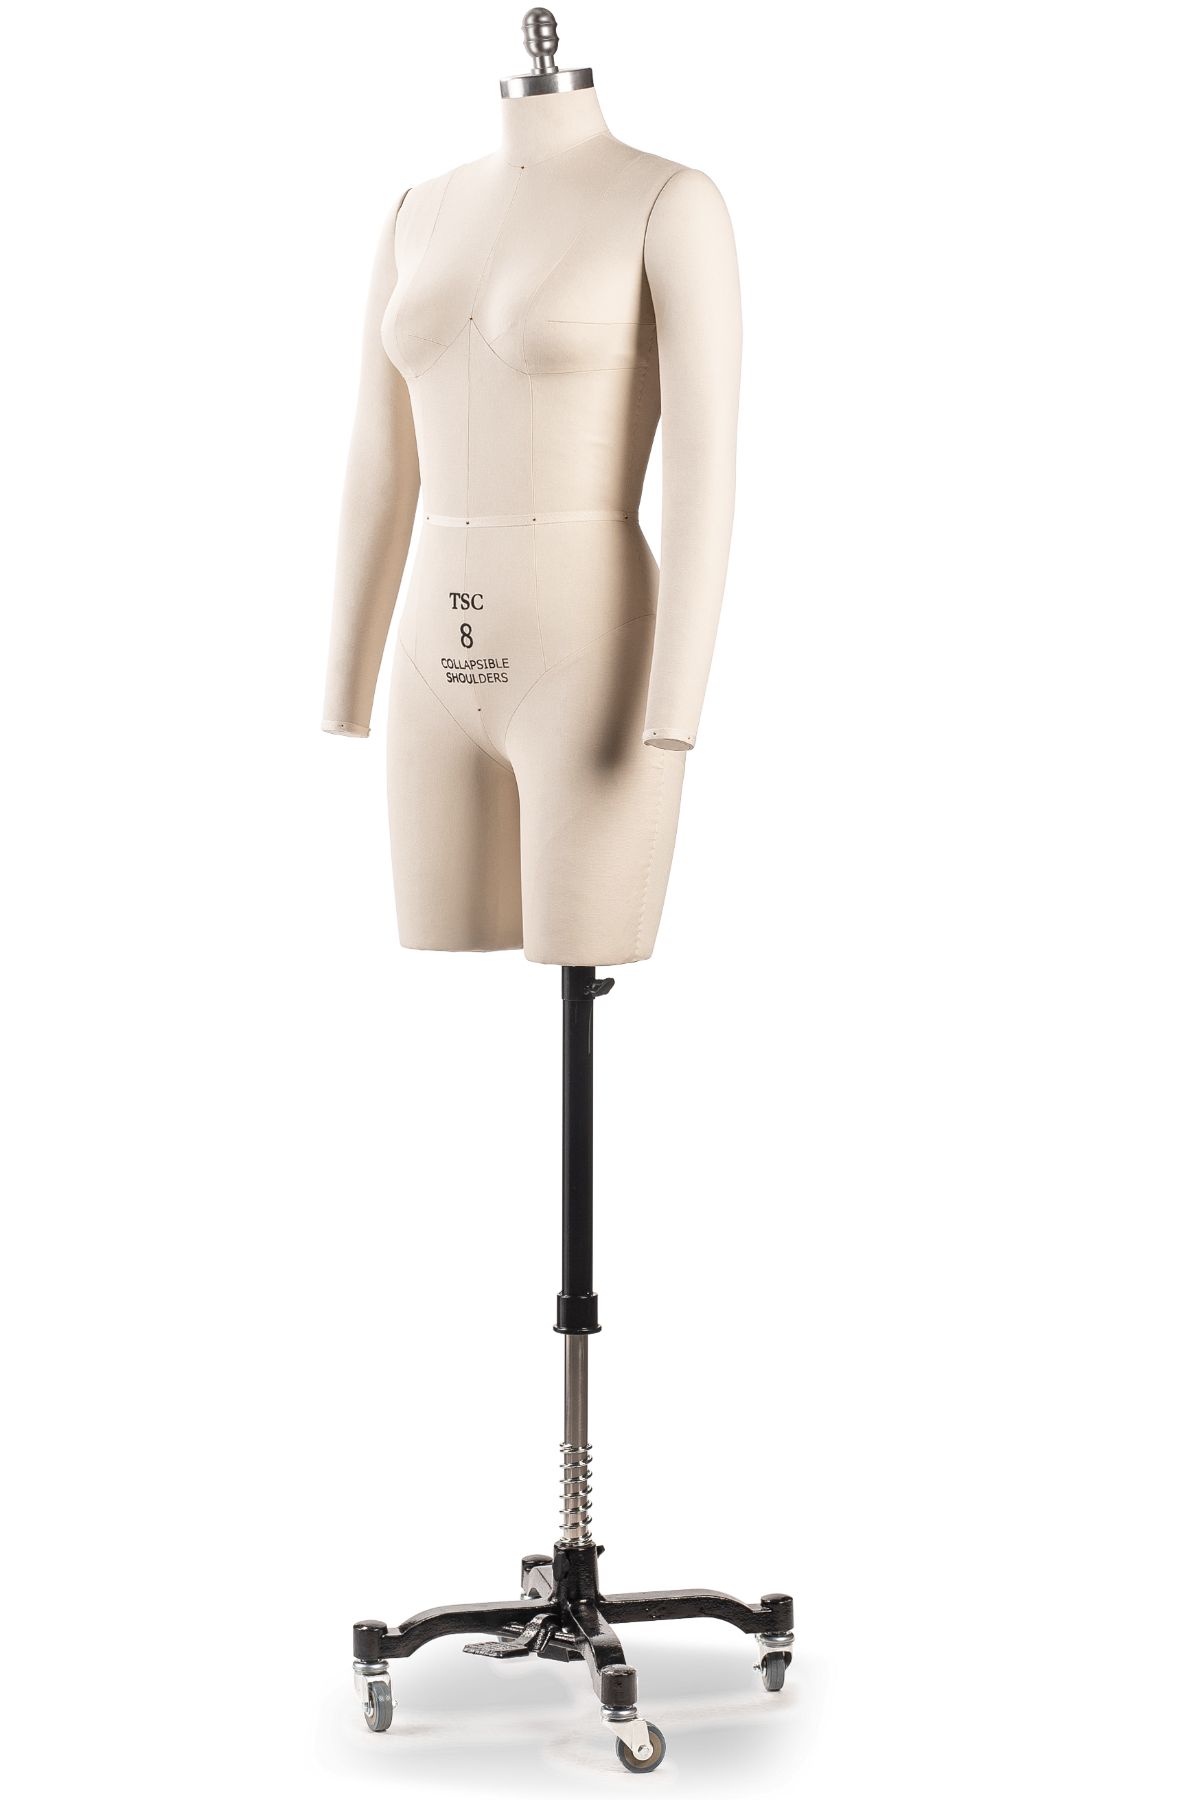 28.5" Female Upper Body 3/4 Torso Mannequin with Adjustable Arms 3 Legged Base 